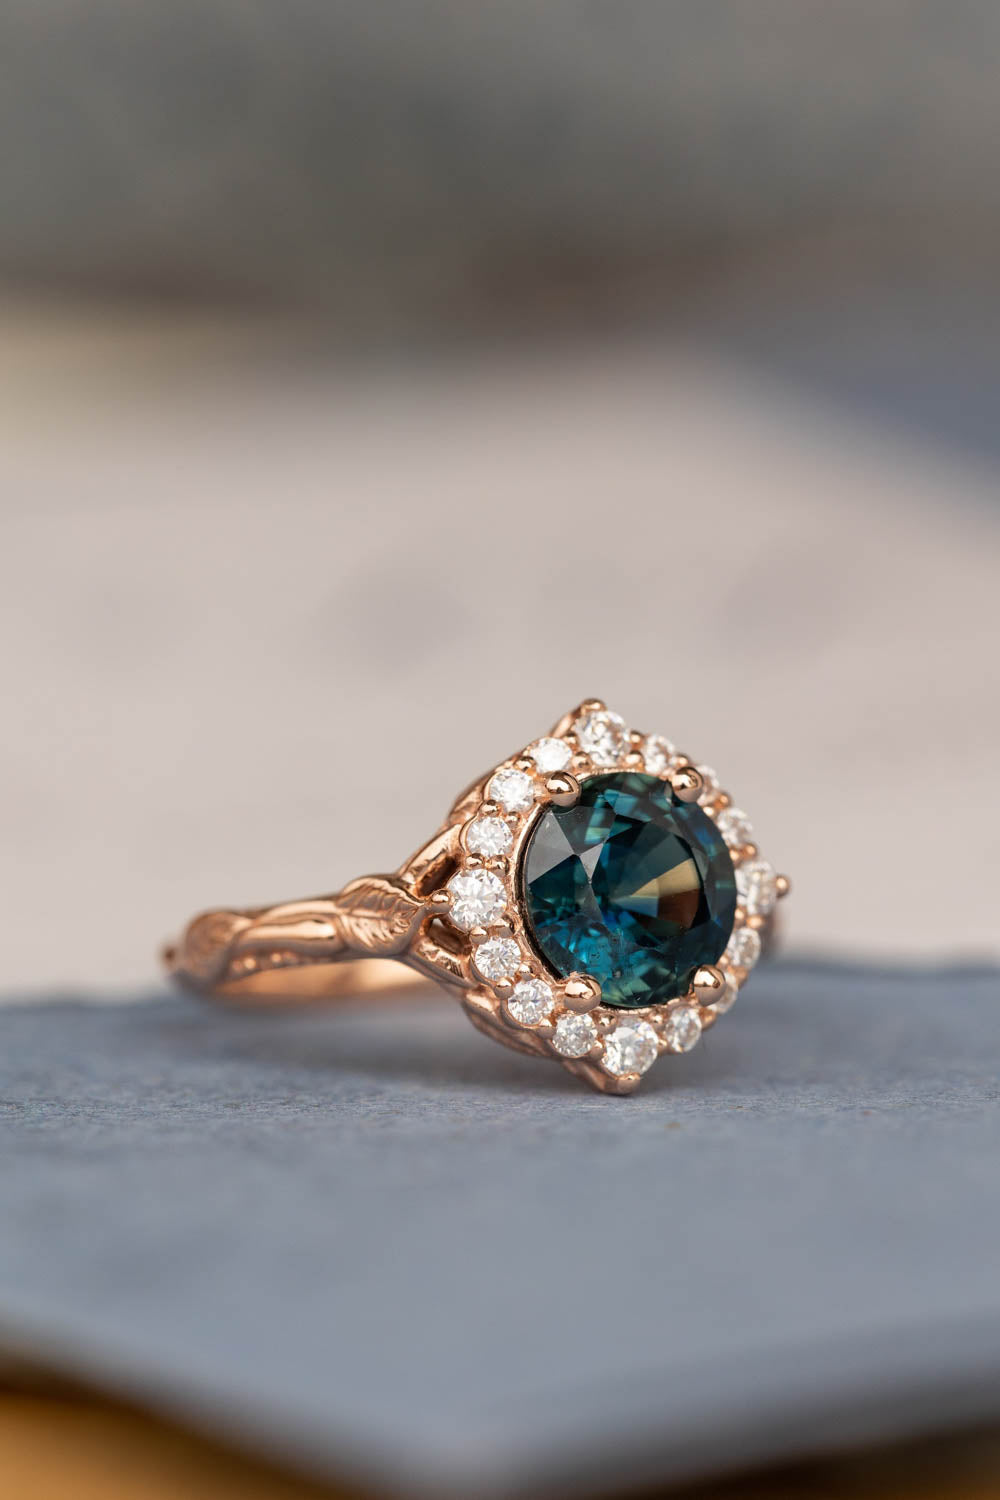 Gorgeous teal sapphire engagement ring with diamond halo, nature inspired gold ring with 2.3 carat sapphire and diamonds / Florentina - Eden Garden Jewelry™